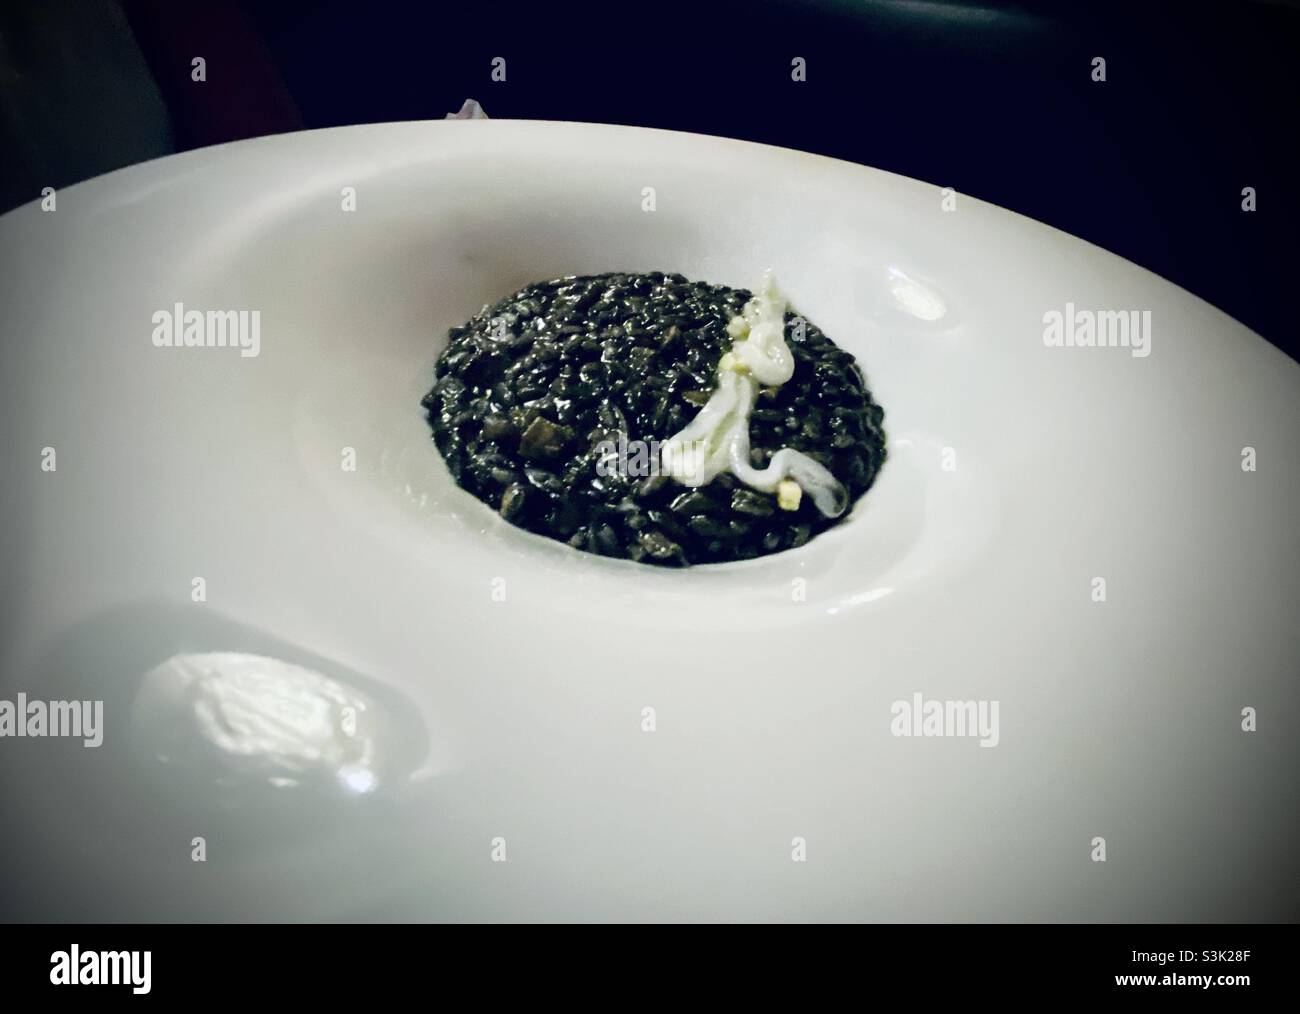 Squid ink risotto in Venice, Italy Stock Photo